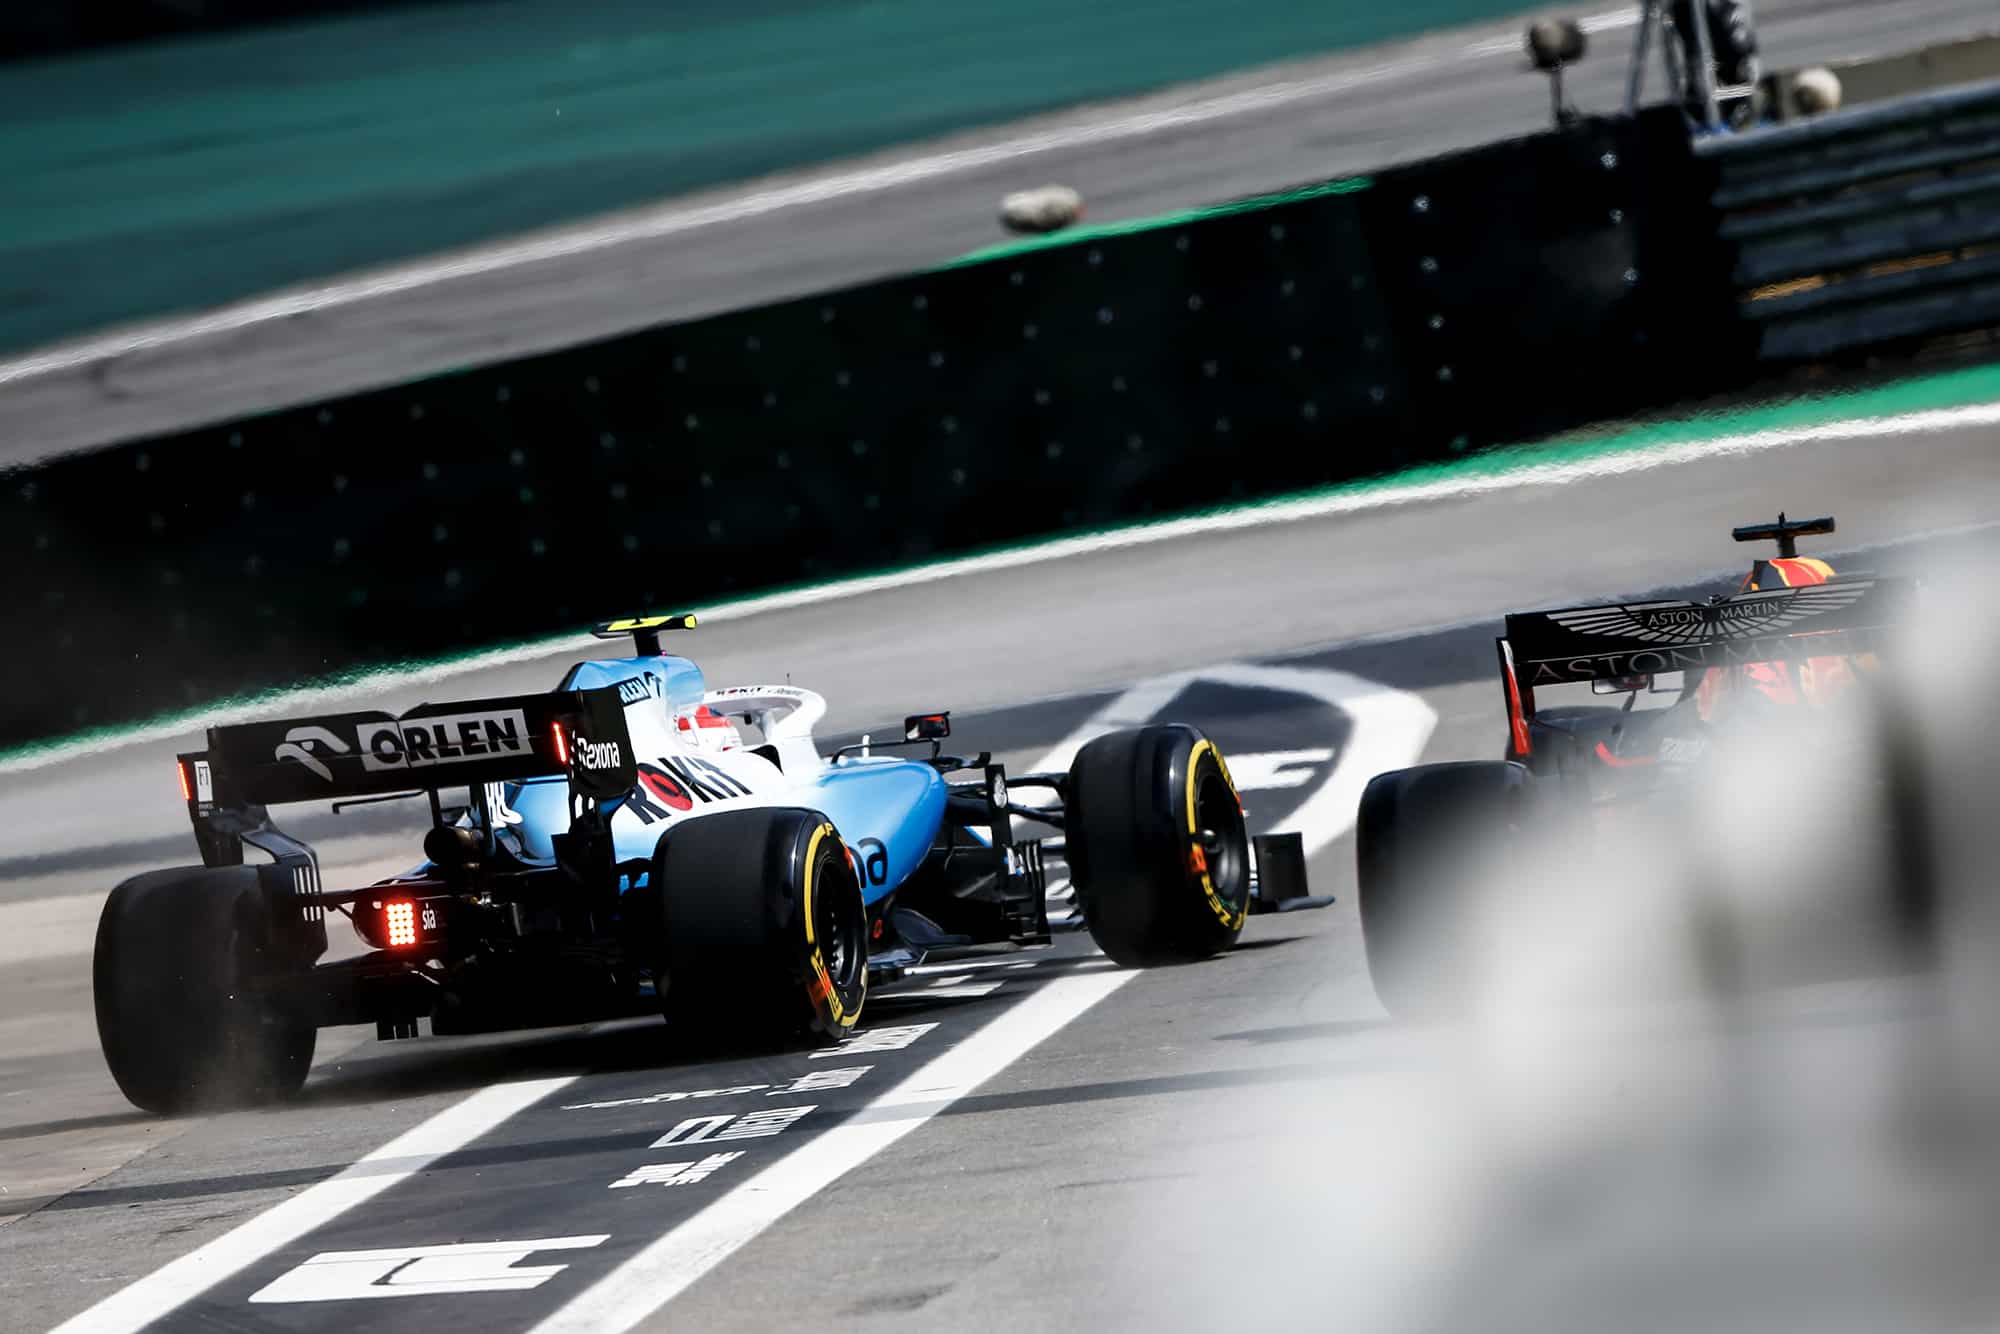 Kubica is released ahead of Verstappen in the pits during the 2019 Brazilian Grand Prix